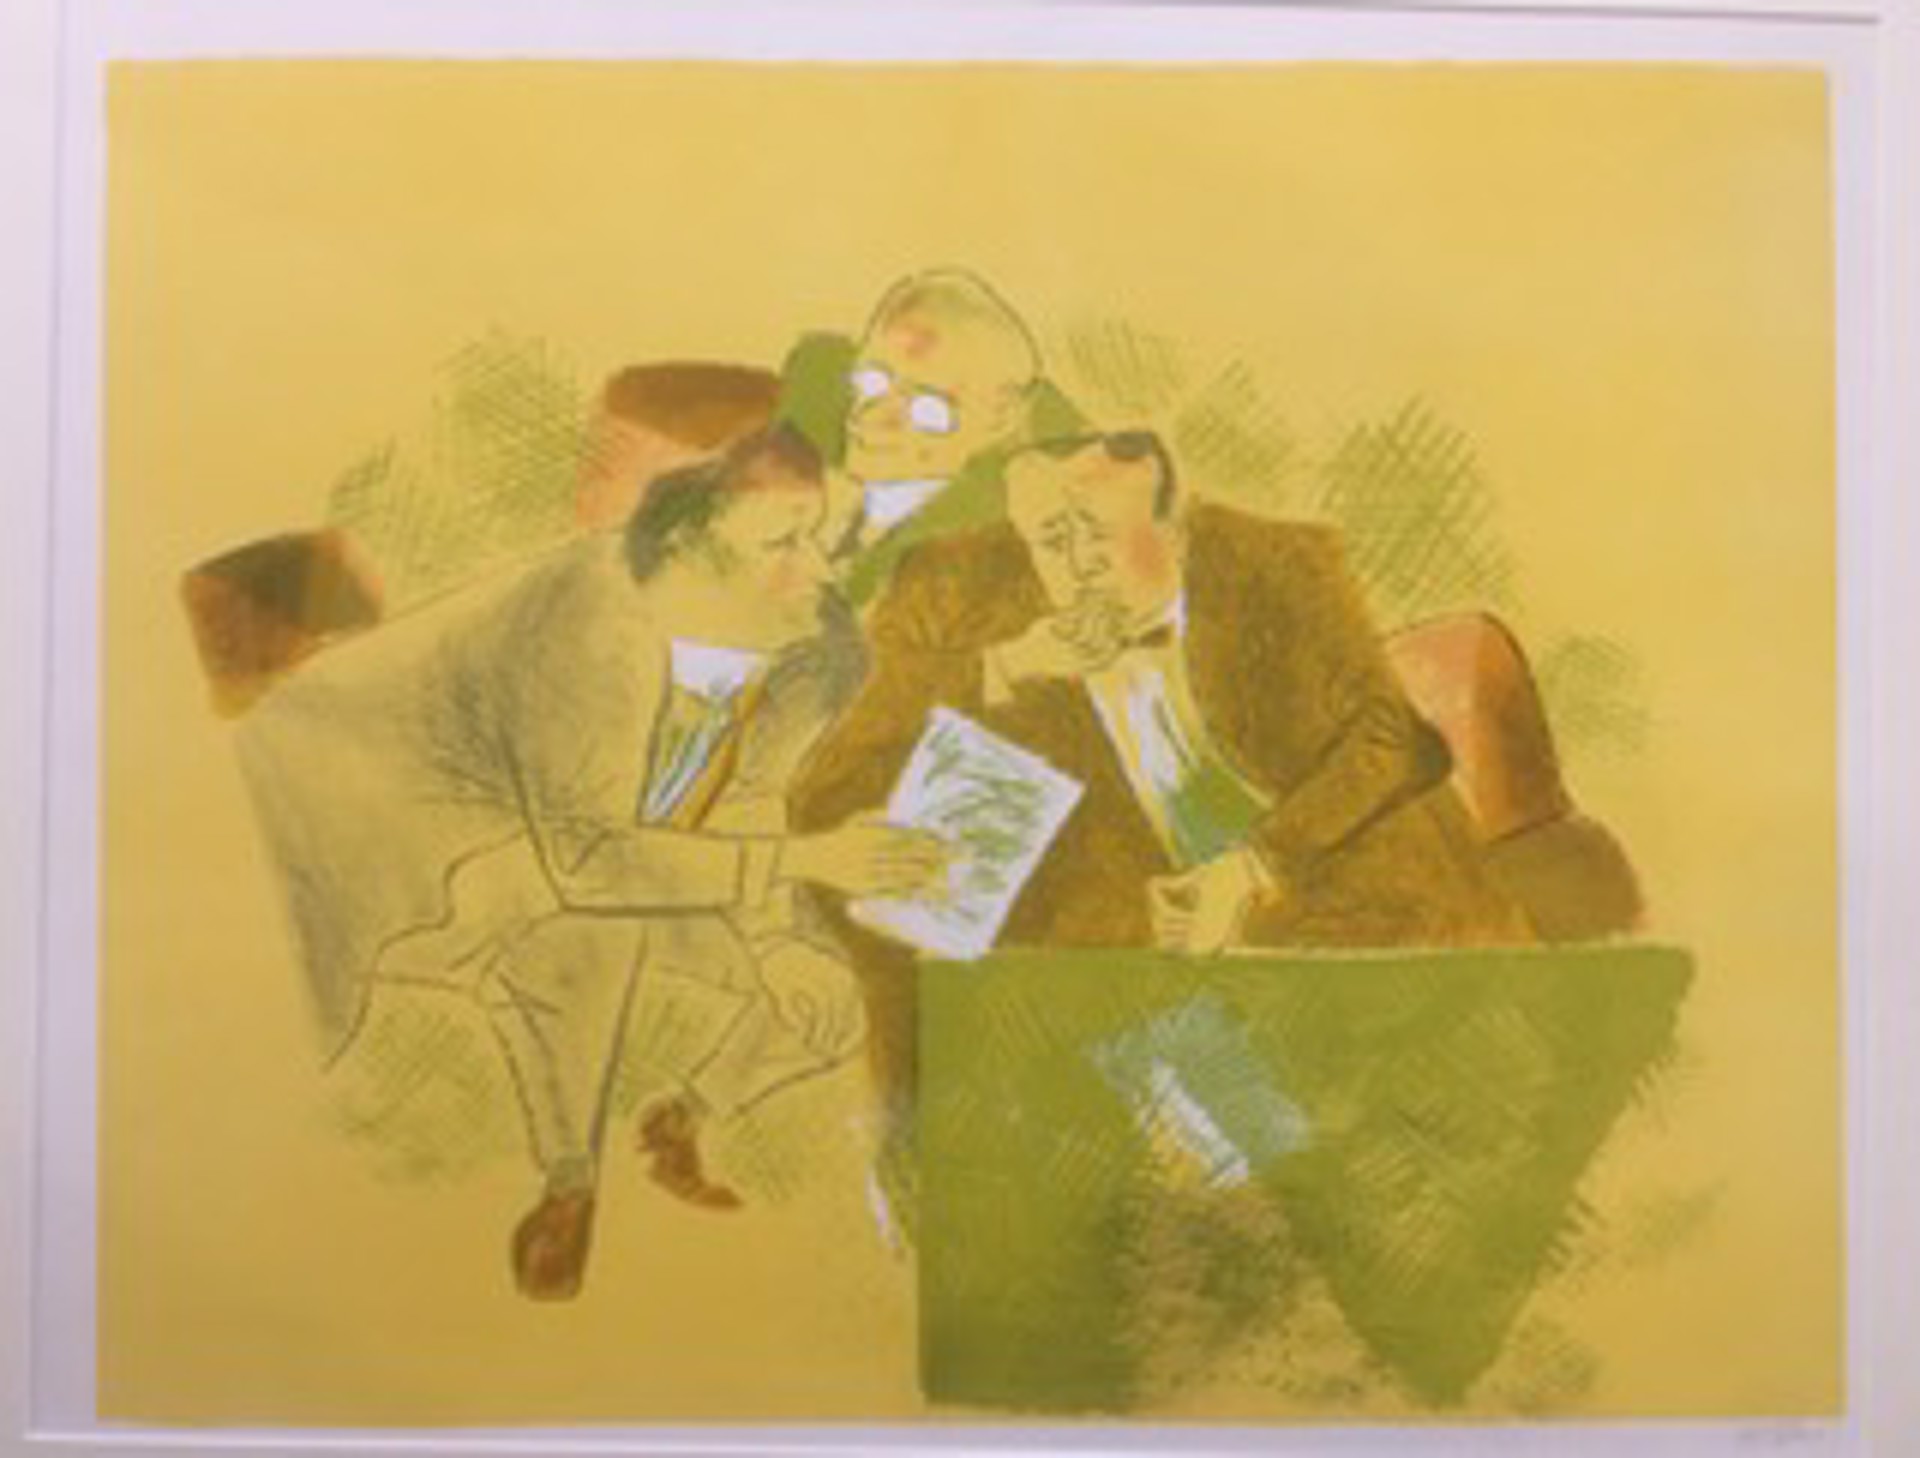 Courtroom Scene by William Gropper